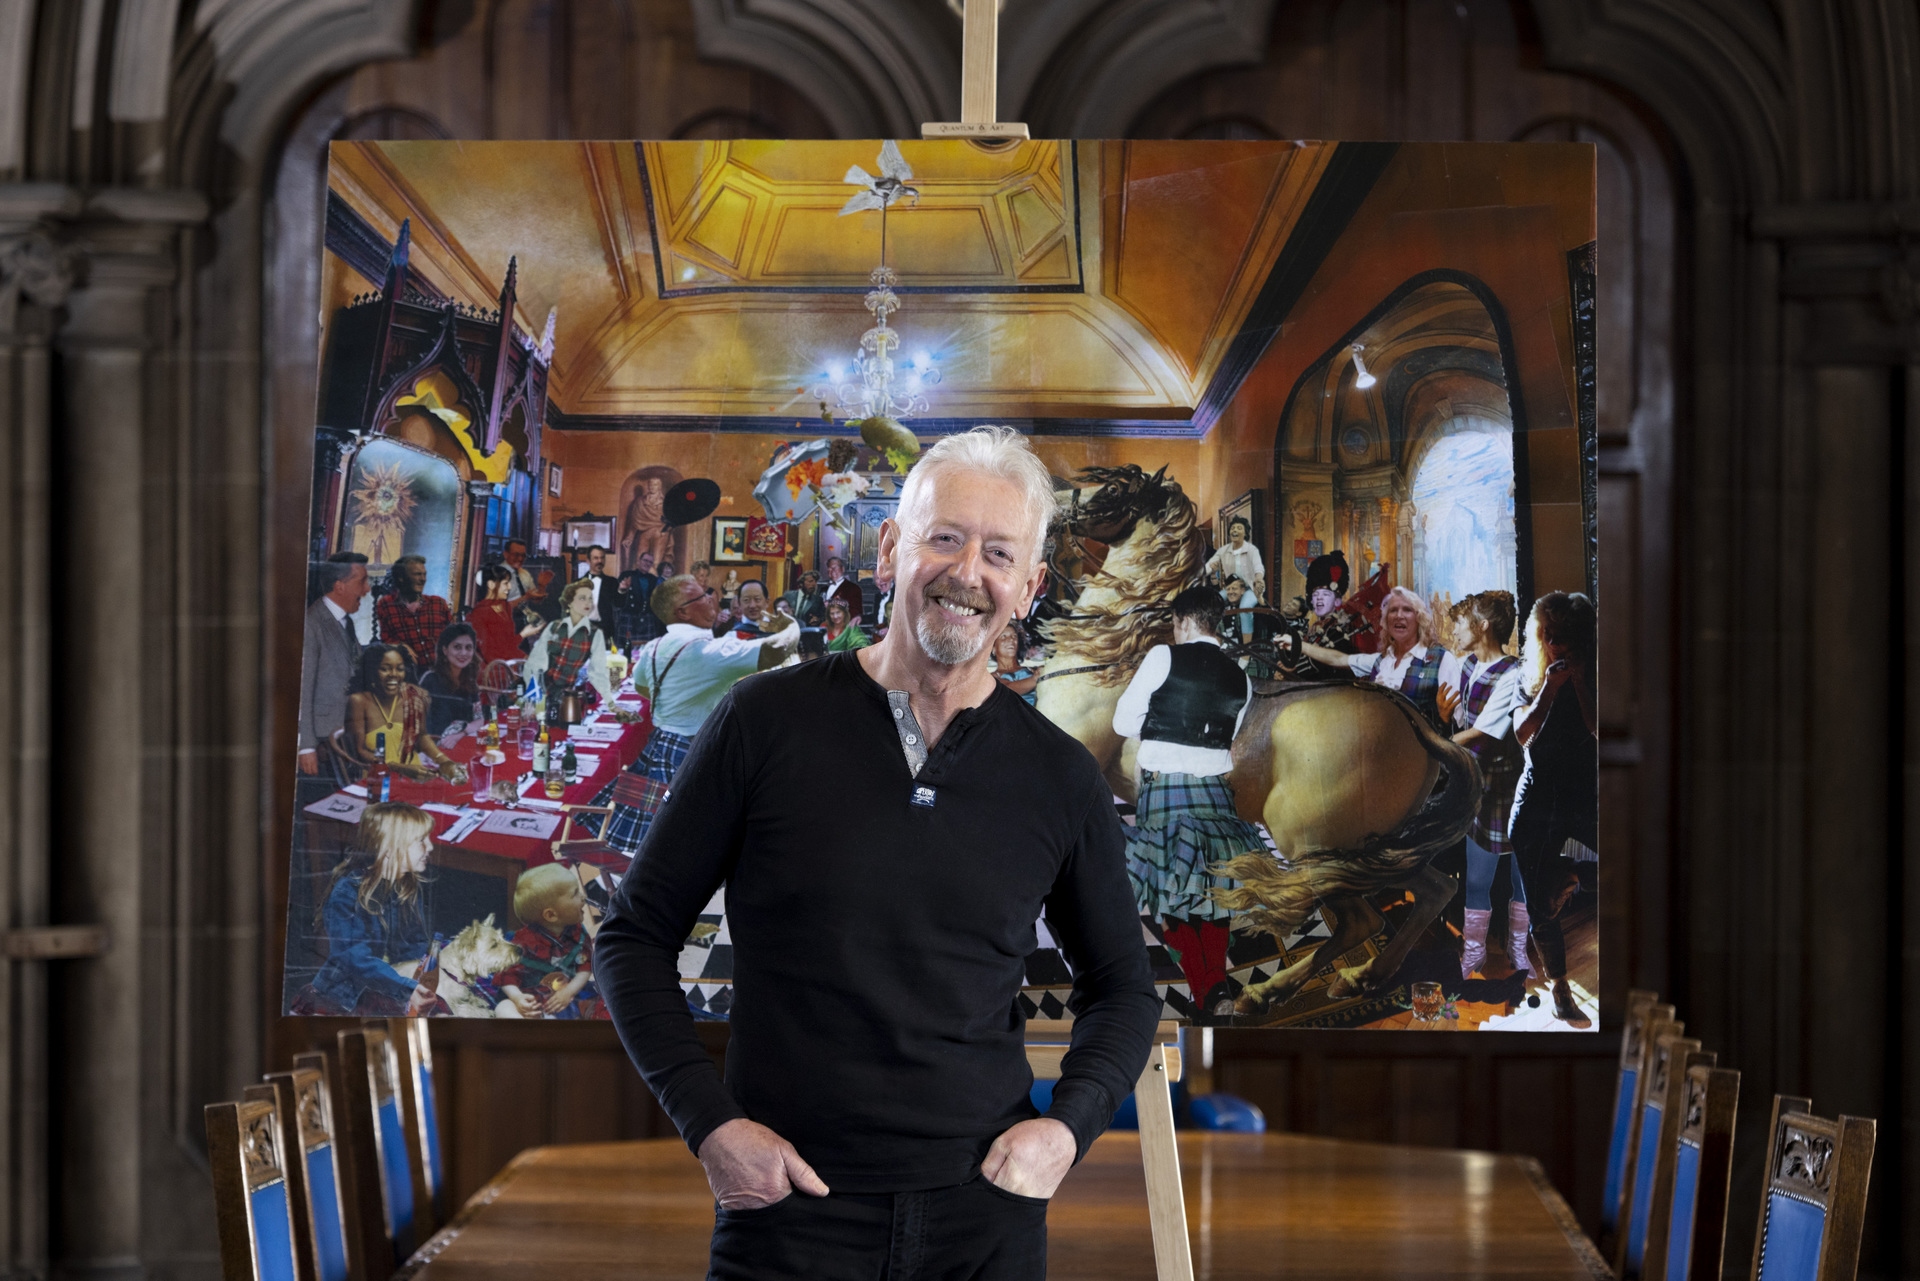 University of Glasgow of artist David Mach with his work The Flying Haggis. (PA Media/Martin Shields)